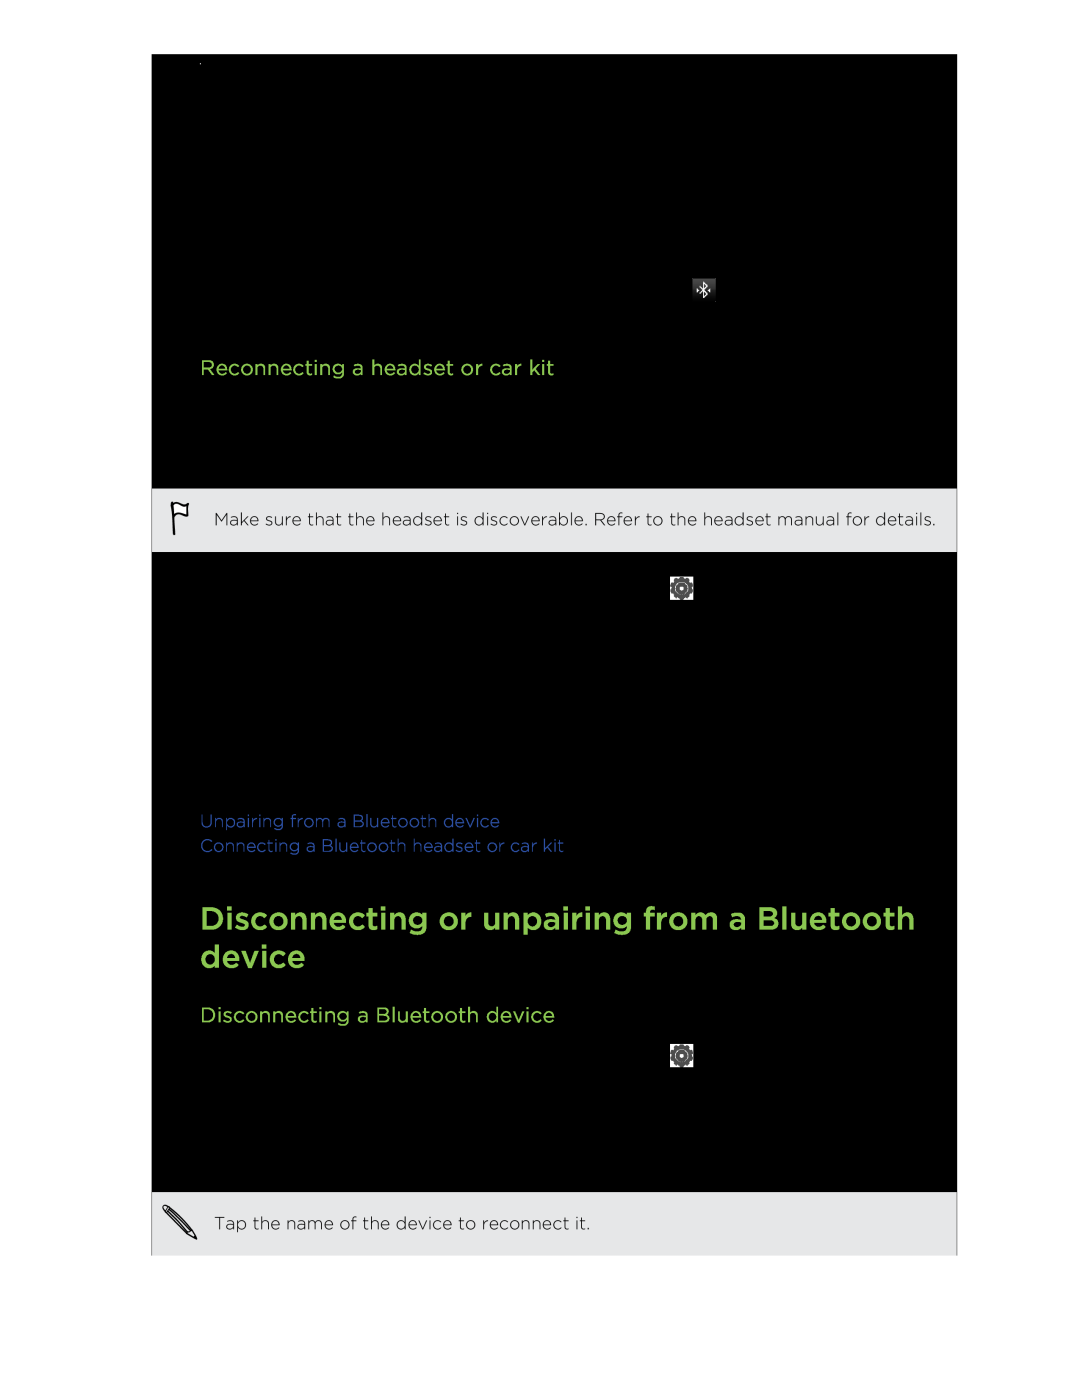 HTC C3HTCONEV4GBUNLOCKEDBLACK manual Disconnecting or unpairing from a Bluetooth device, Reconnecting a headset or car kit 